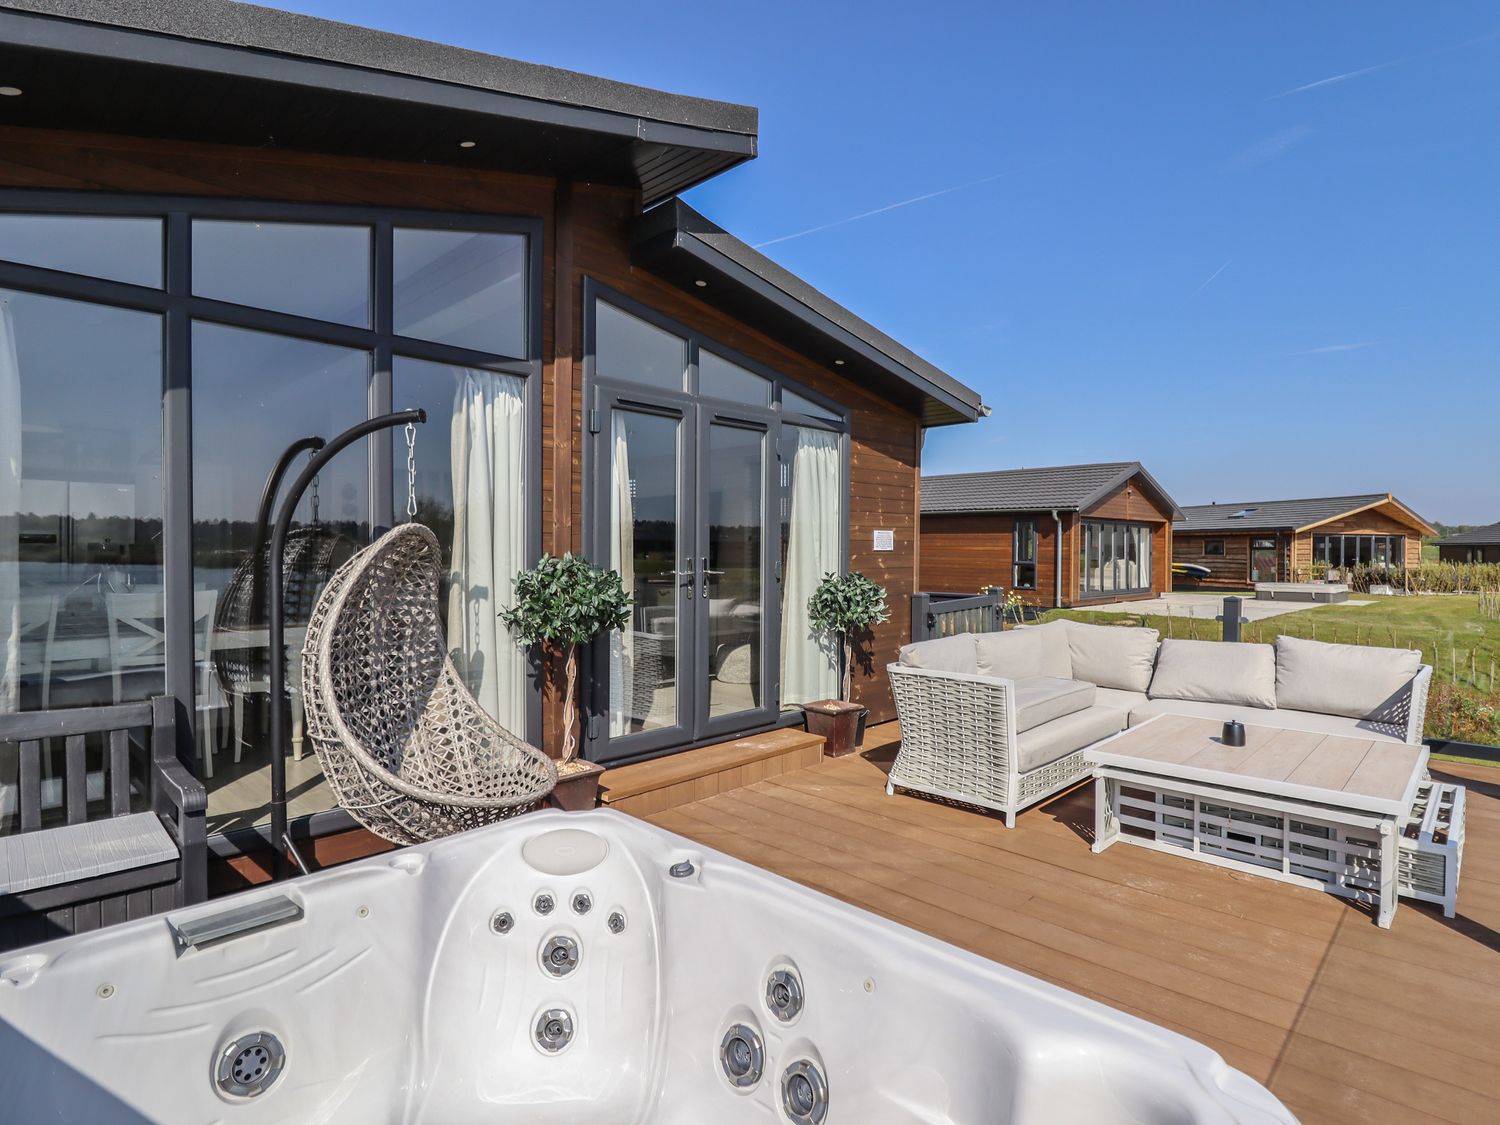 Lodge 1, is in Delamere, Cheshire. Close to amenities and a lake. Ground-floor living. Hot tub. 3bed